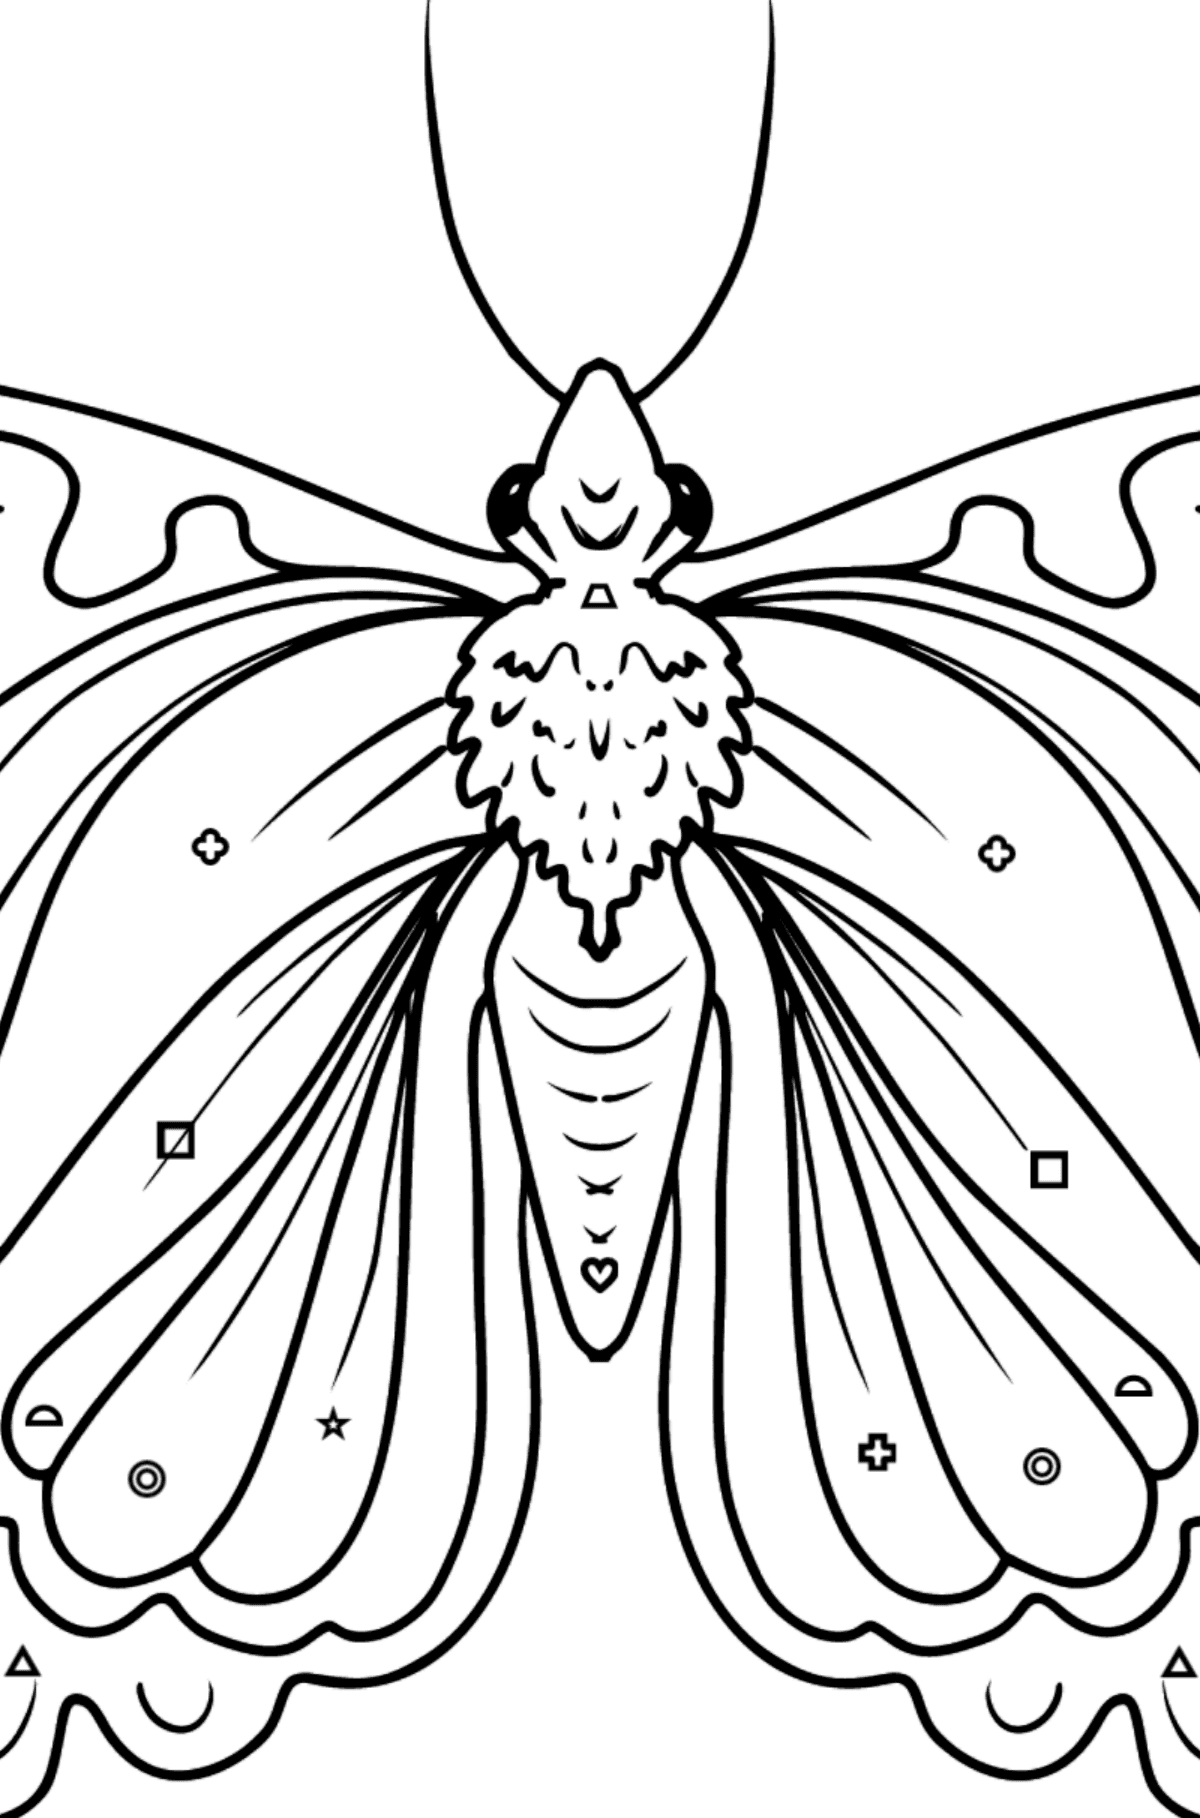 Cute Butterfly coloring page - Coloring by Geometric Shapes for Kids